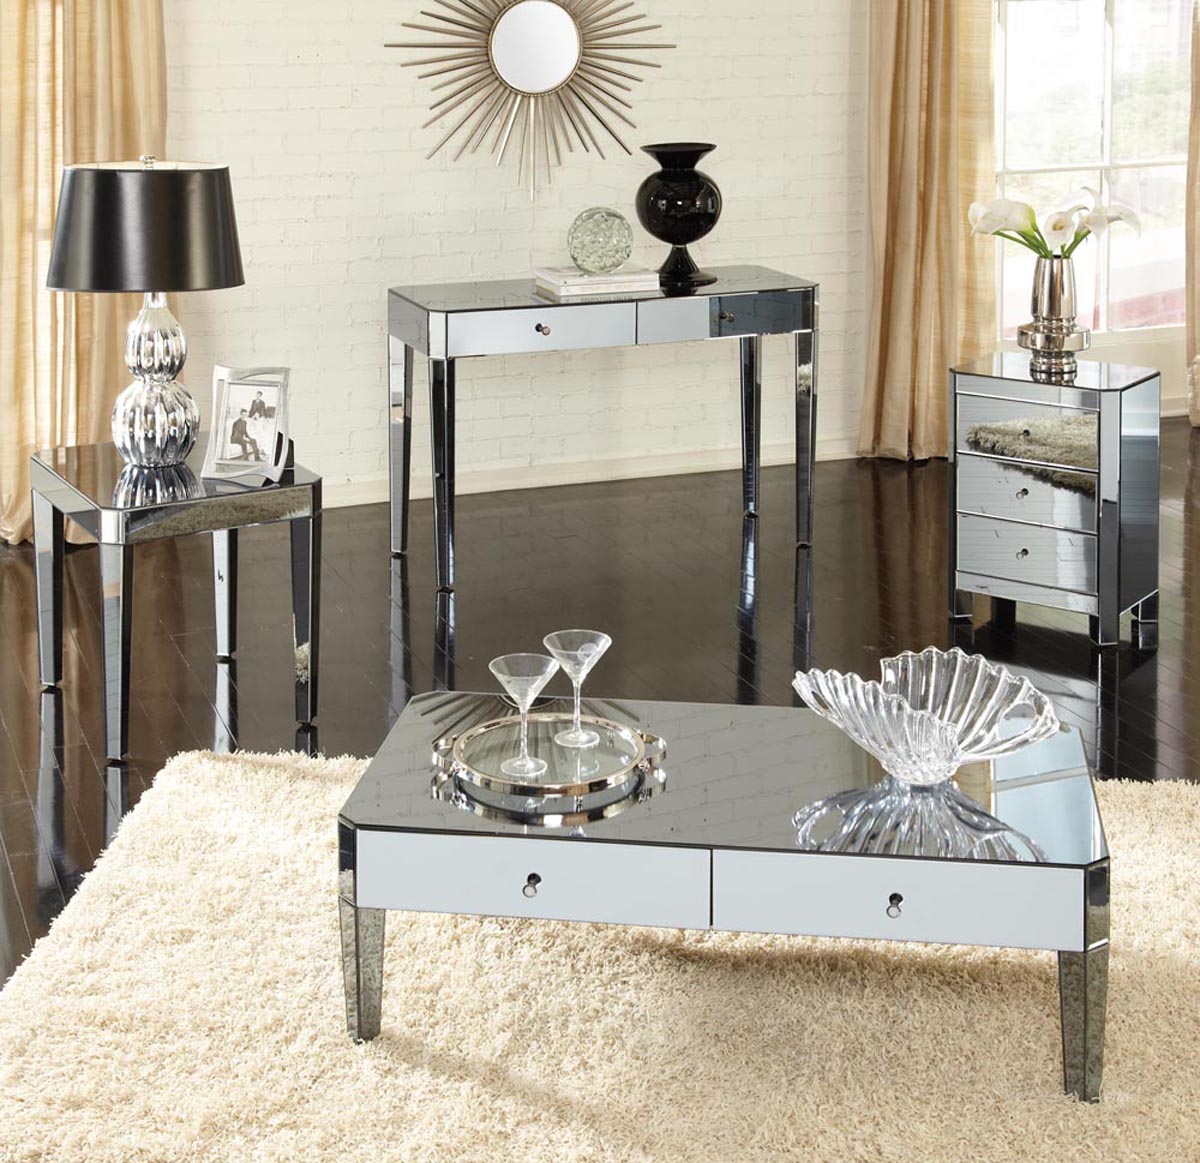 Simple Coffee Table Setting Ideas for Small Bedroom